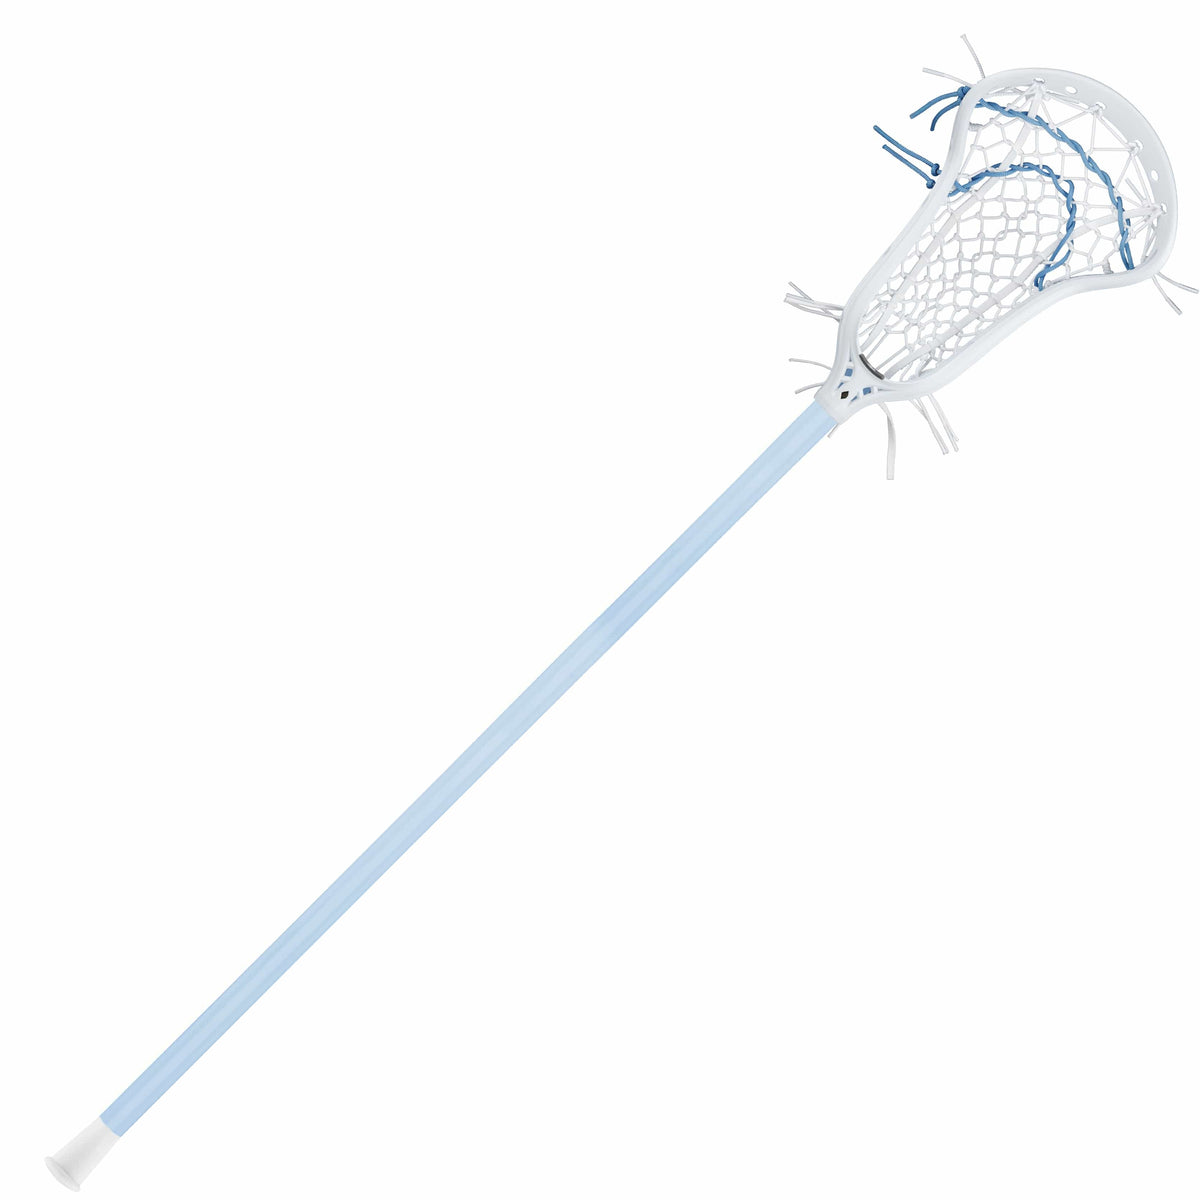 StringKing Womens Complete Sticks Carolina/White StringKing Womens Complete 2 Pro Defense Lacrosse Stick With Tech Trad and Metal 3 Pro Shaft from Lacrosse Fanatic